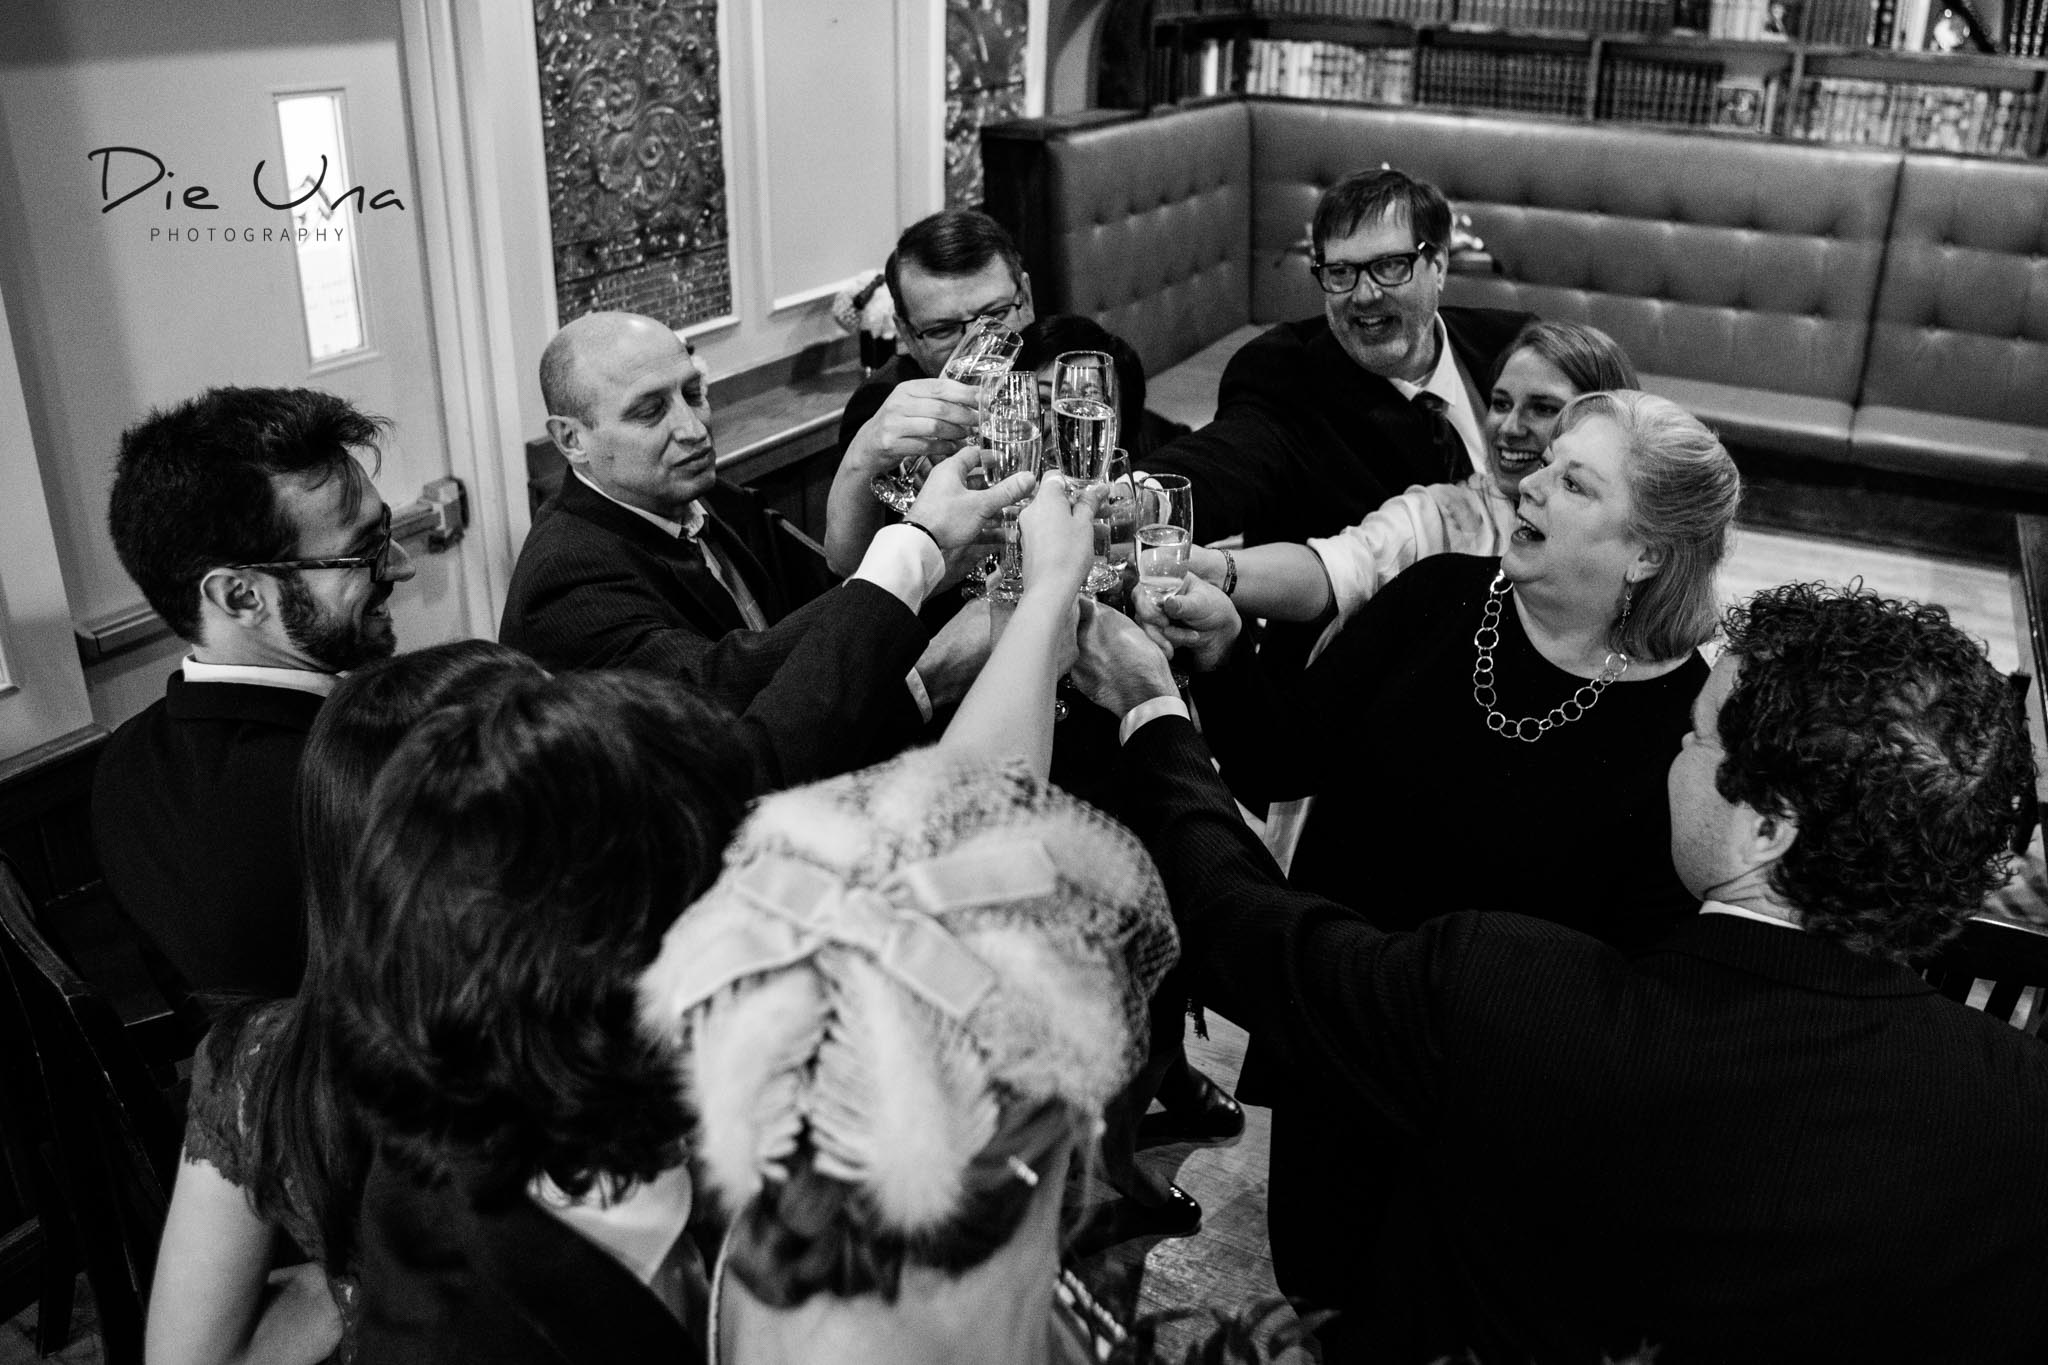  Wedding party clinking champagne in the Arlington Hotel in Paris, Ontario 